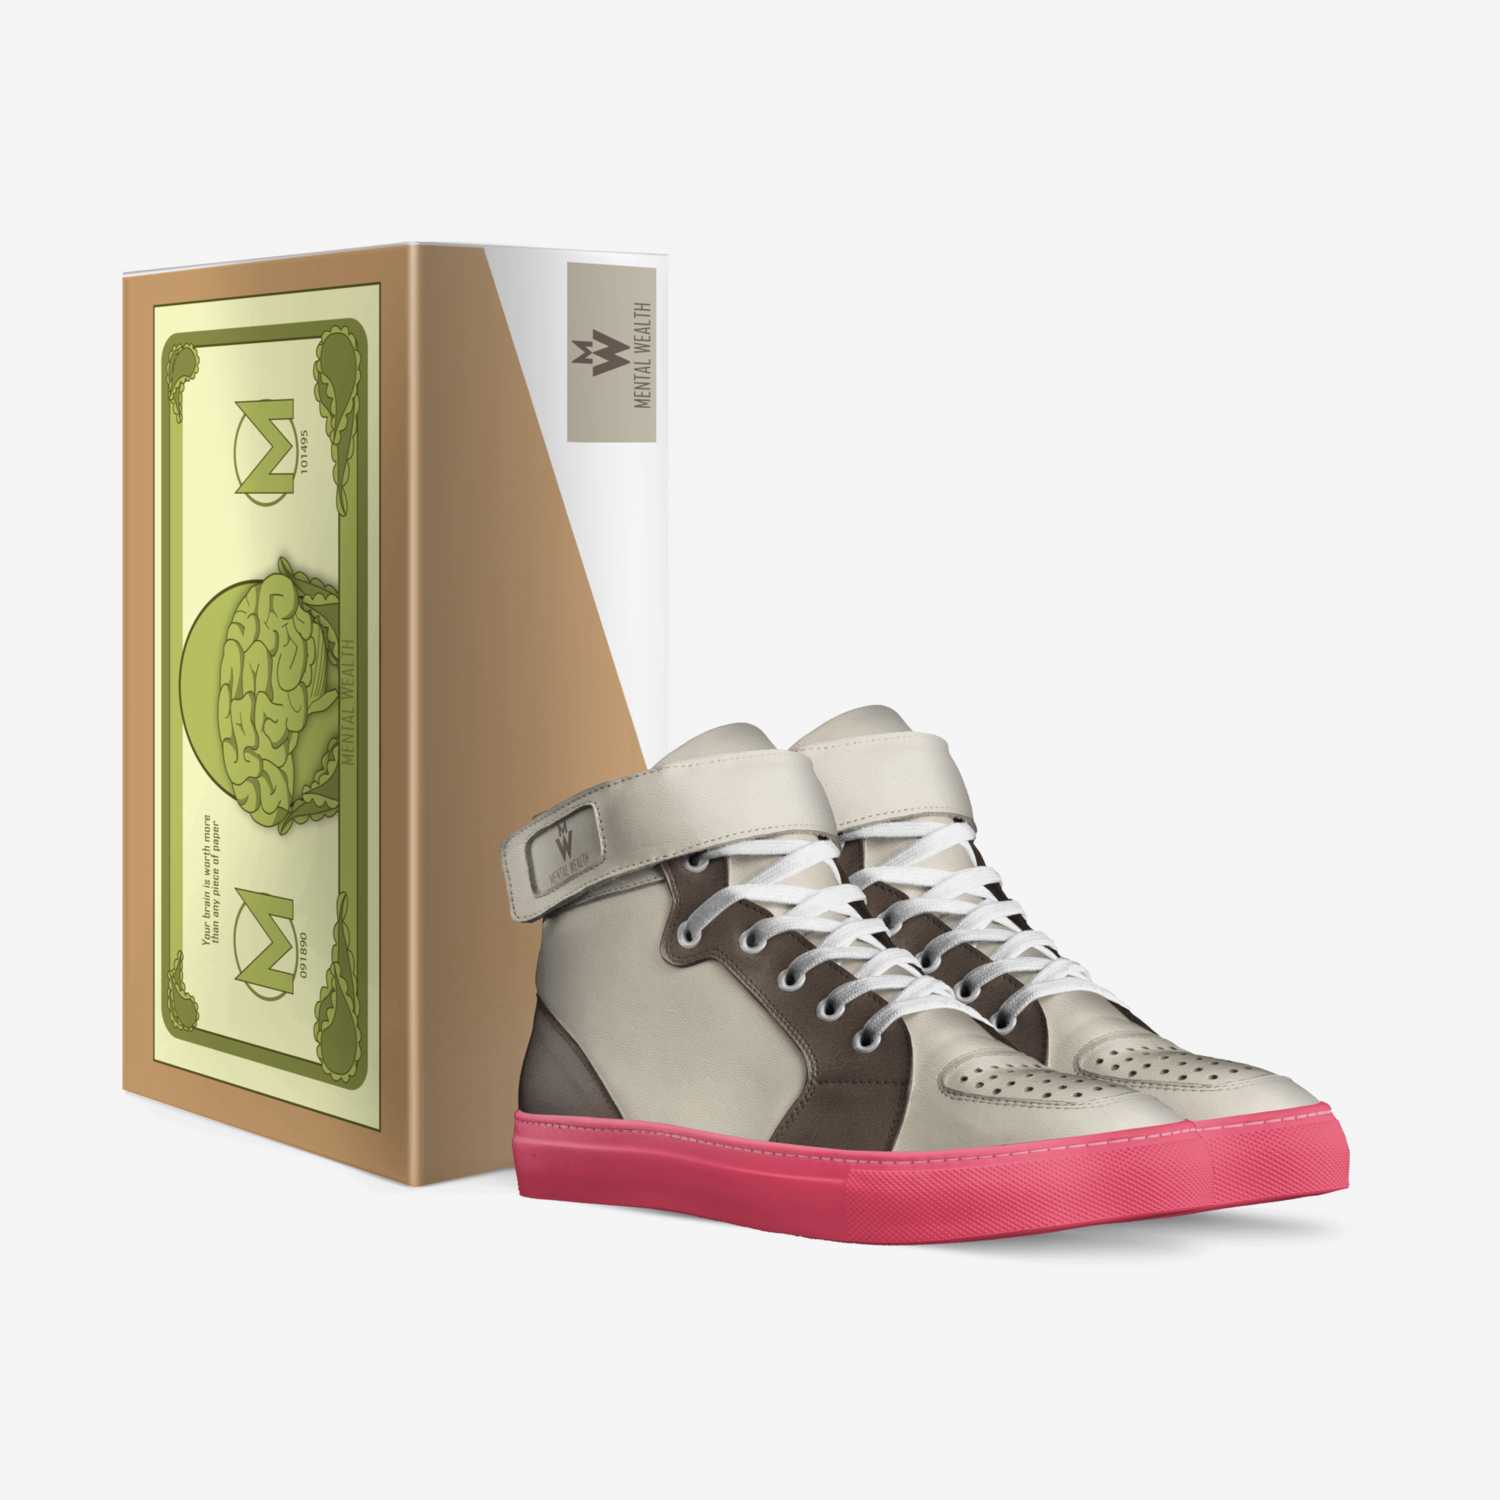 Mental Wealth custom made in Italy shoes by Jimmy Buonavolanto | Box view